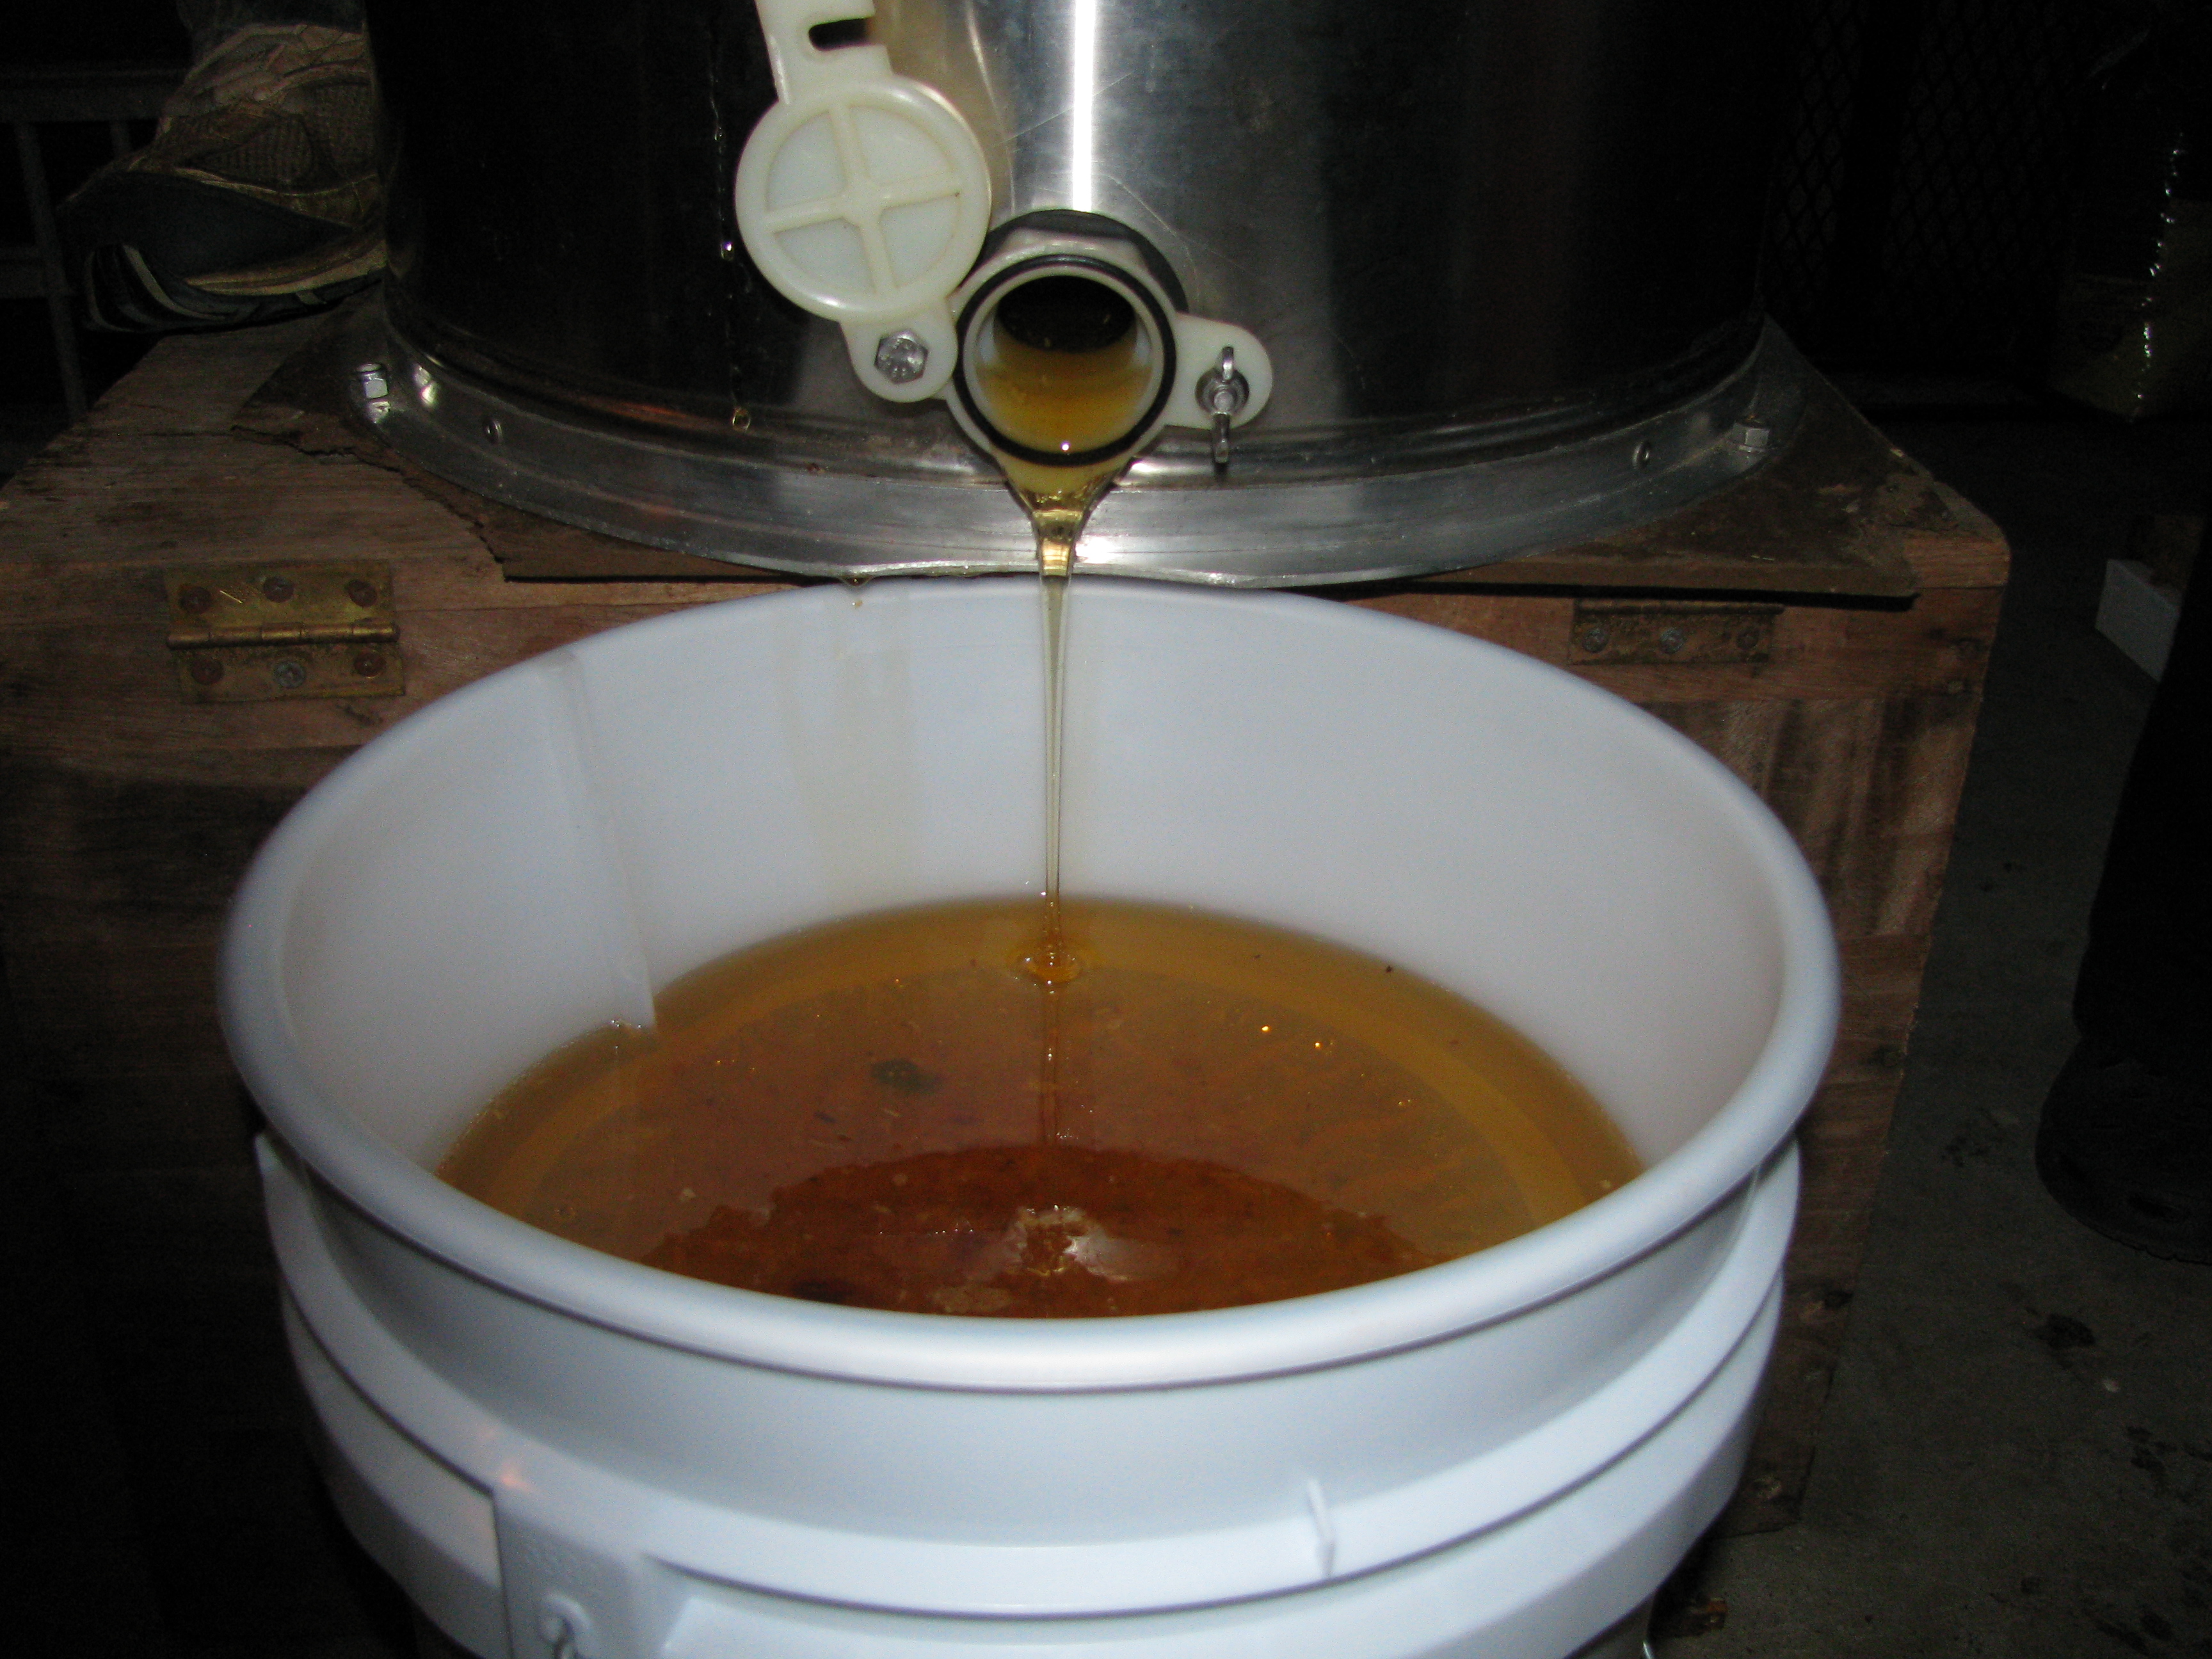 Honey draining from the extractor through the filter